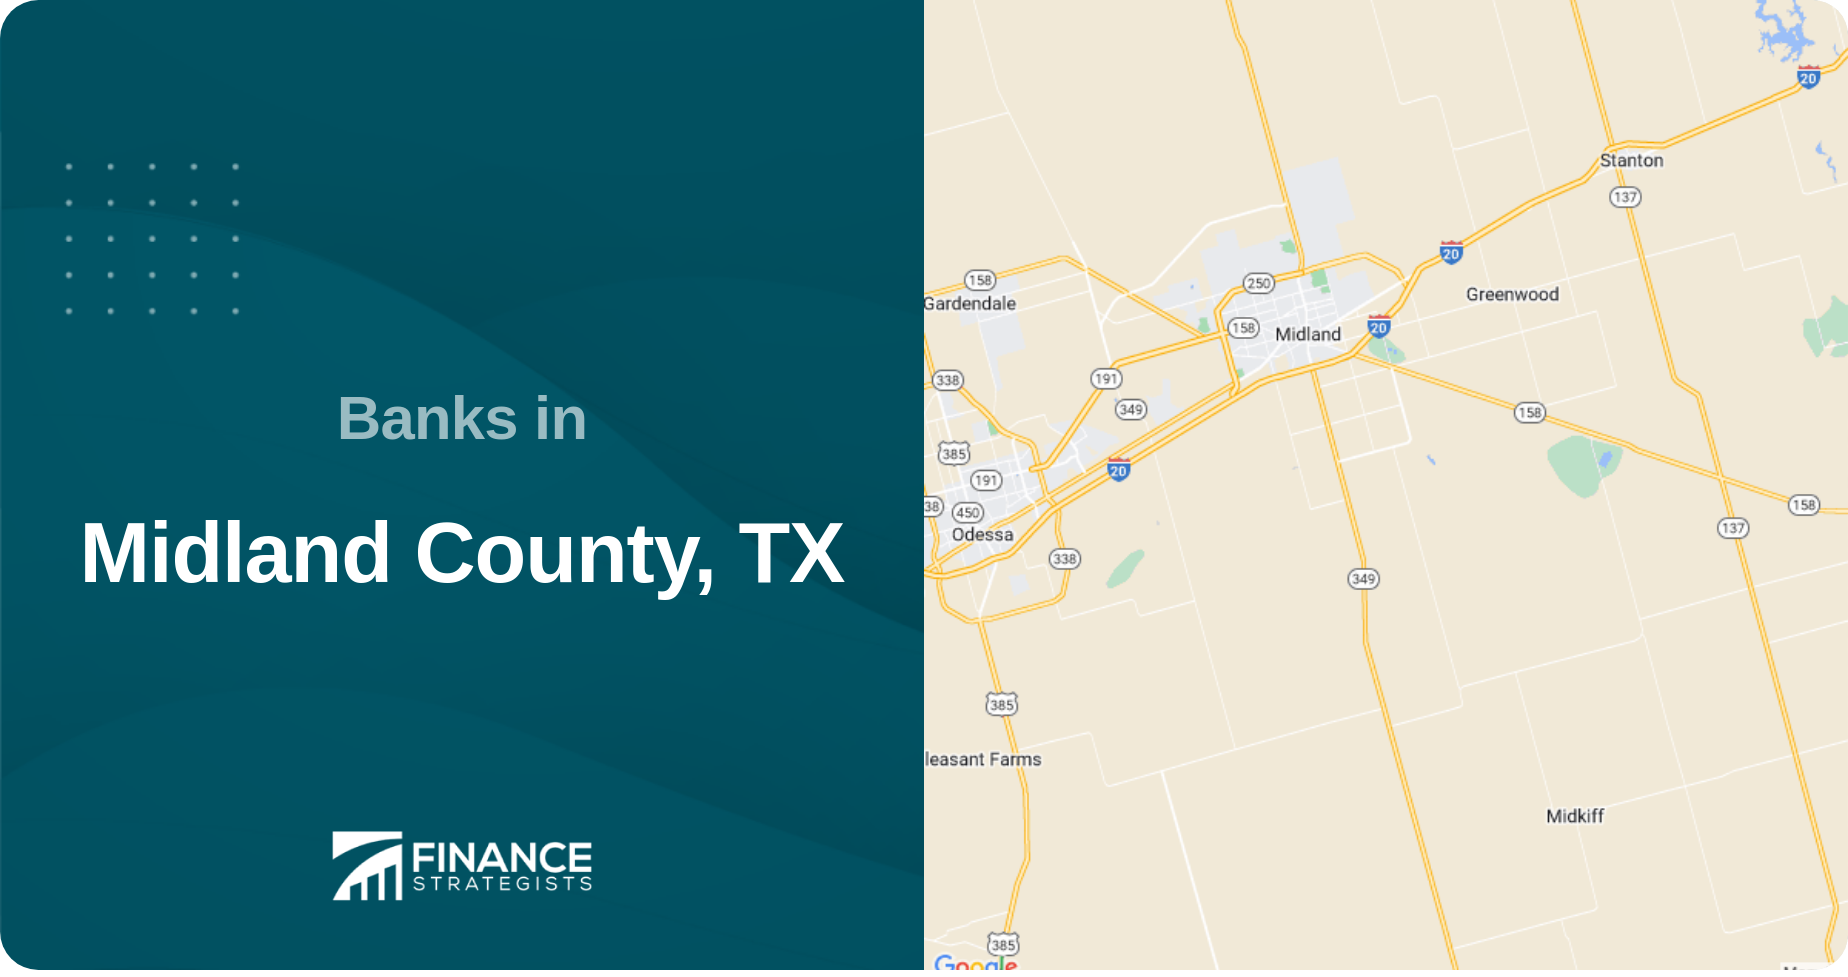 Banks in Midland County, TX